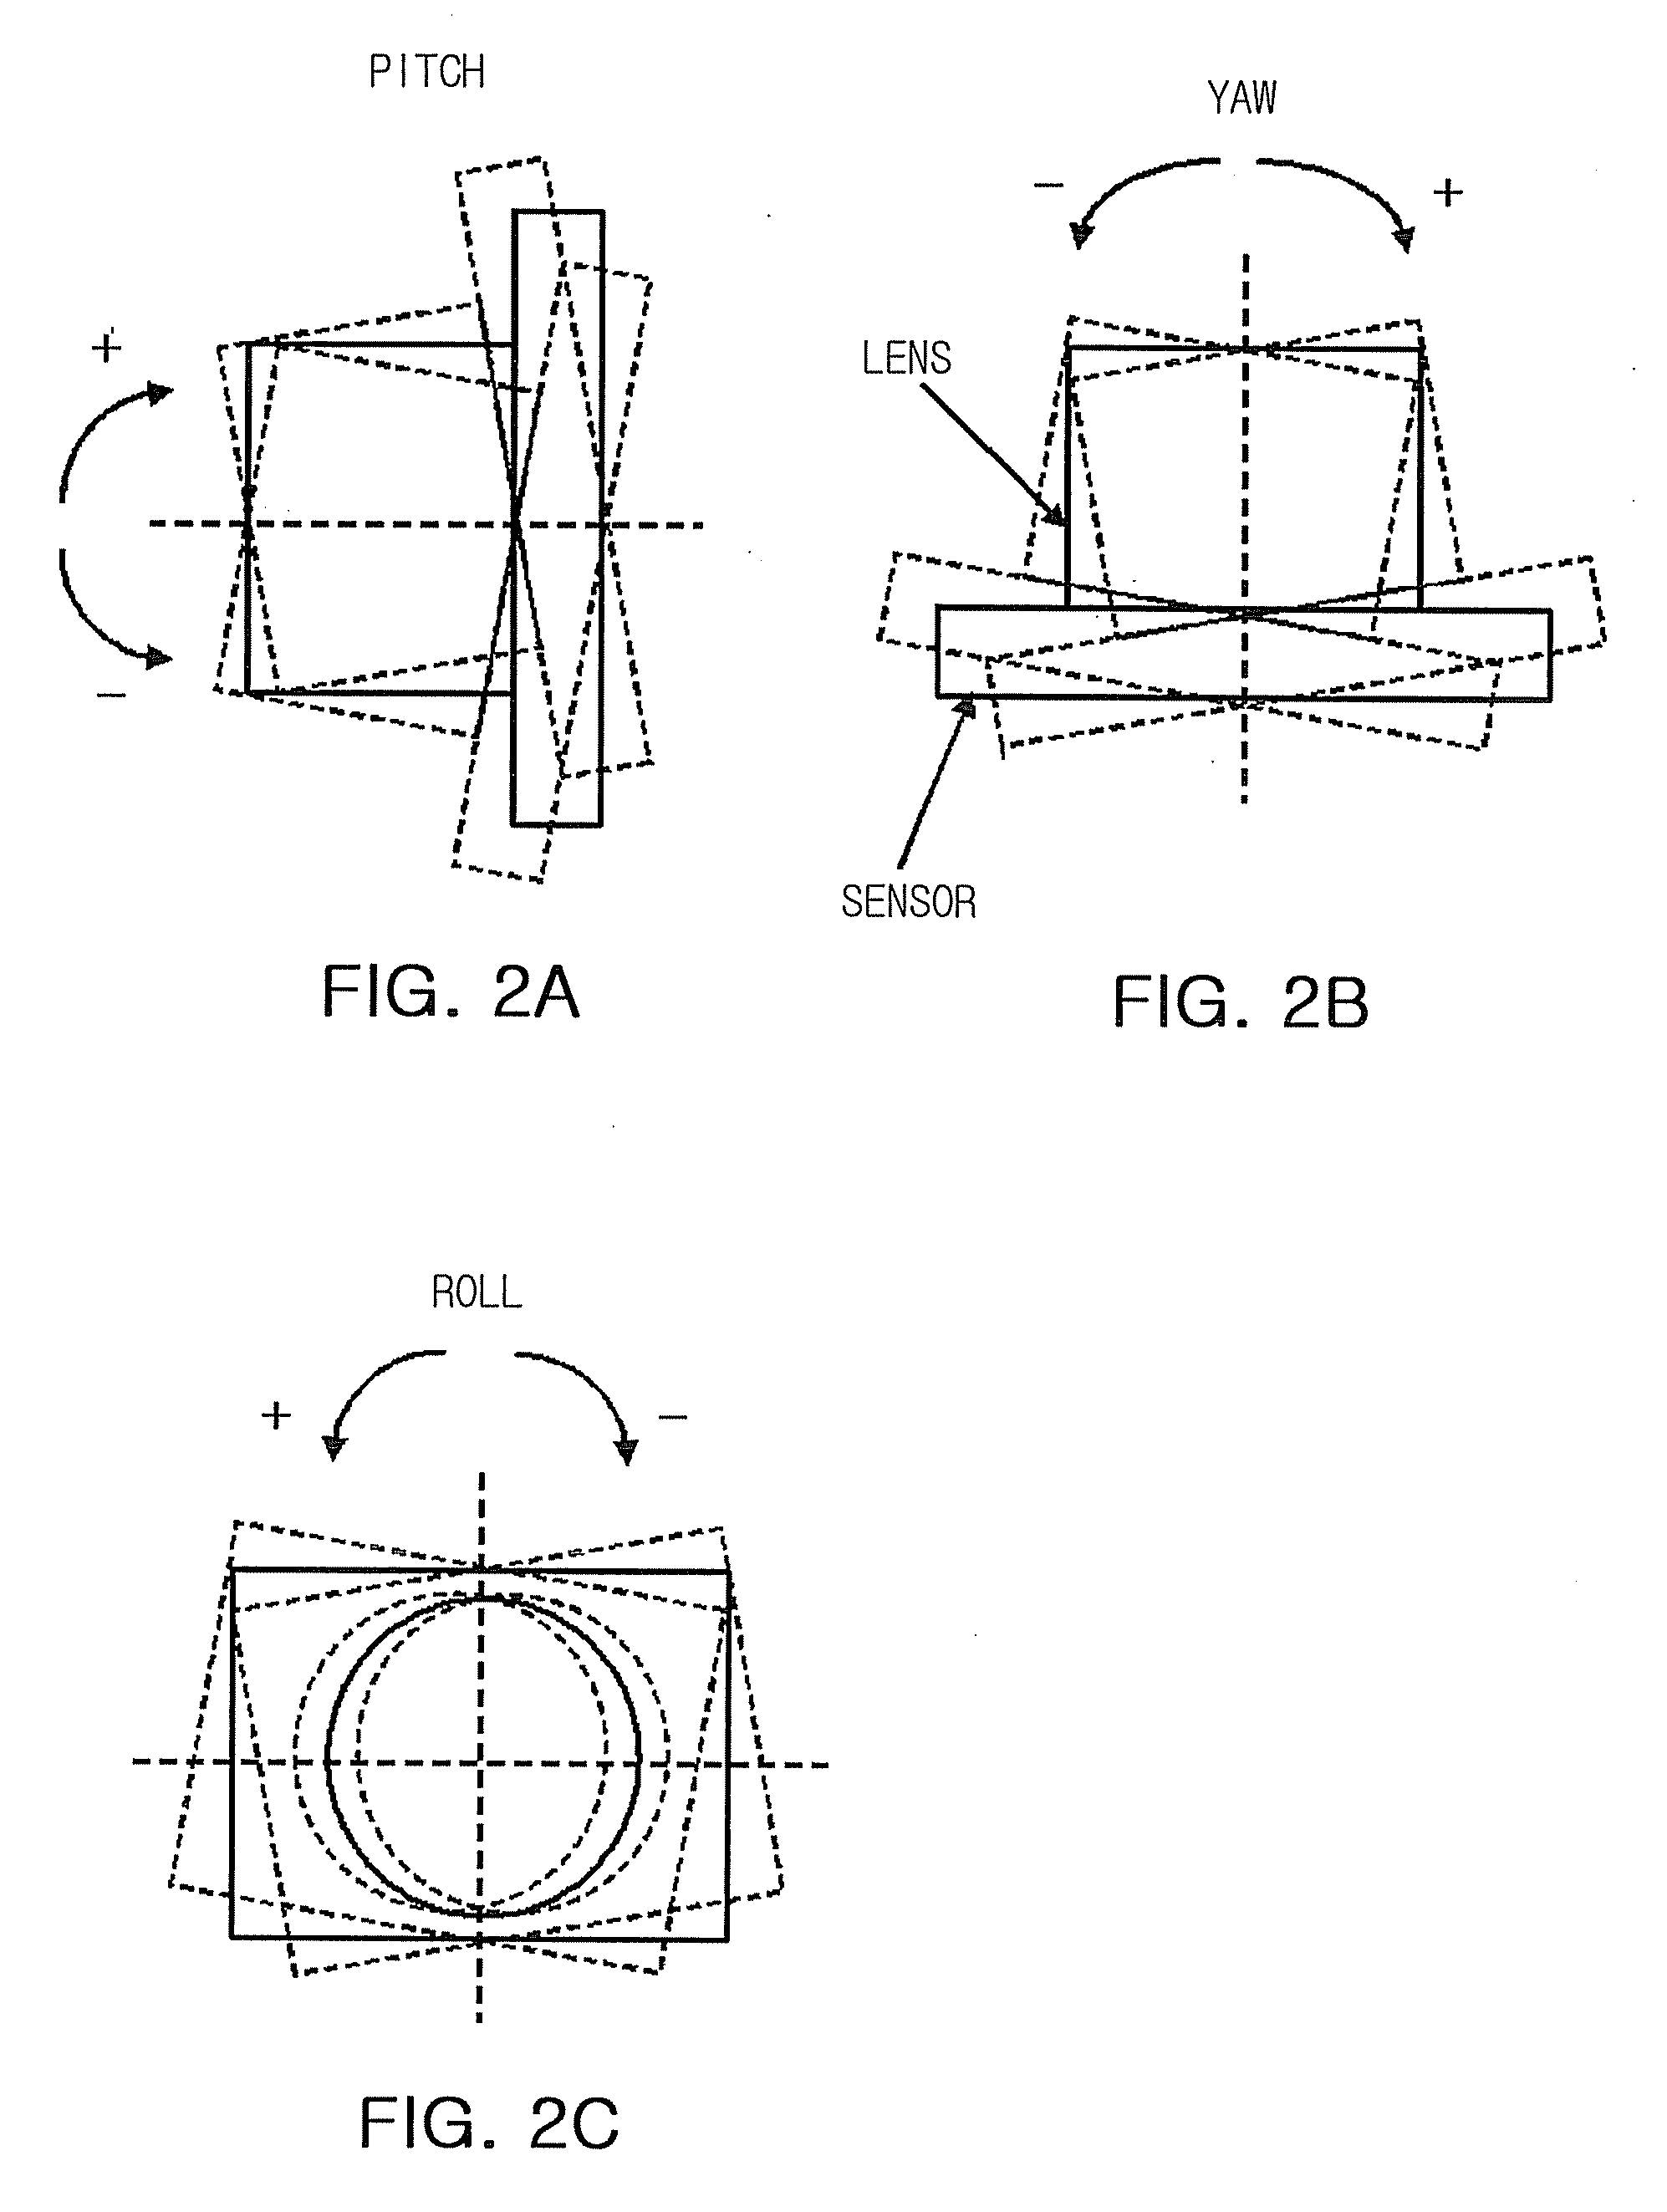 Apparatus for correcting motion caused by hand shake